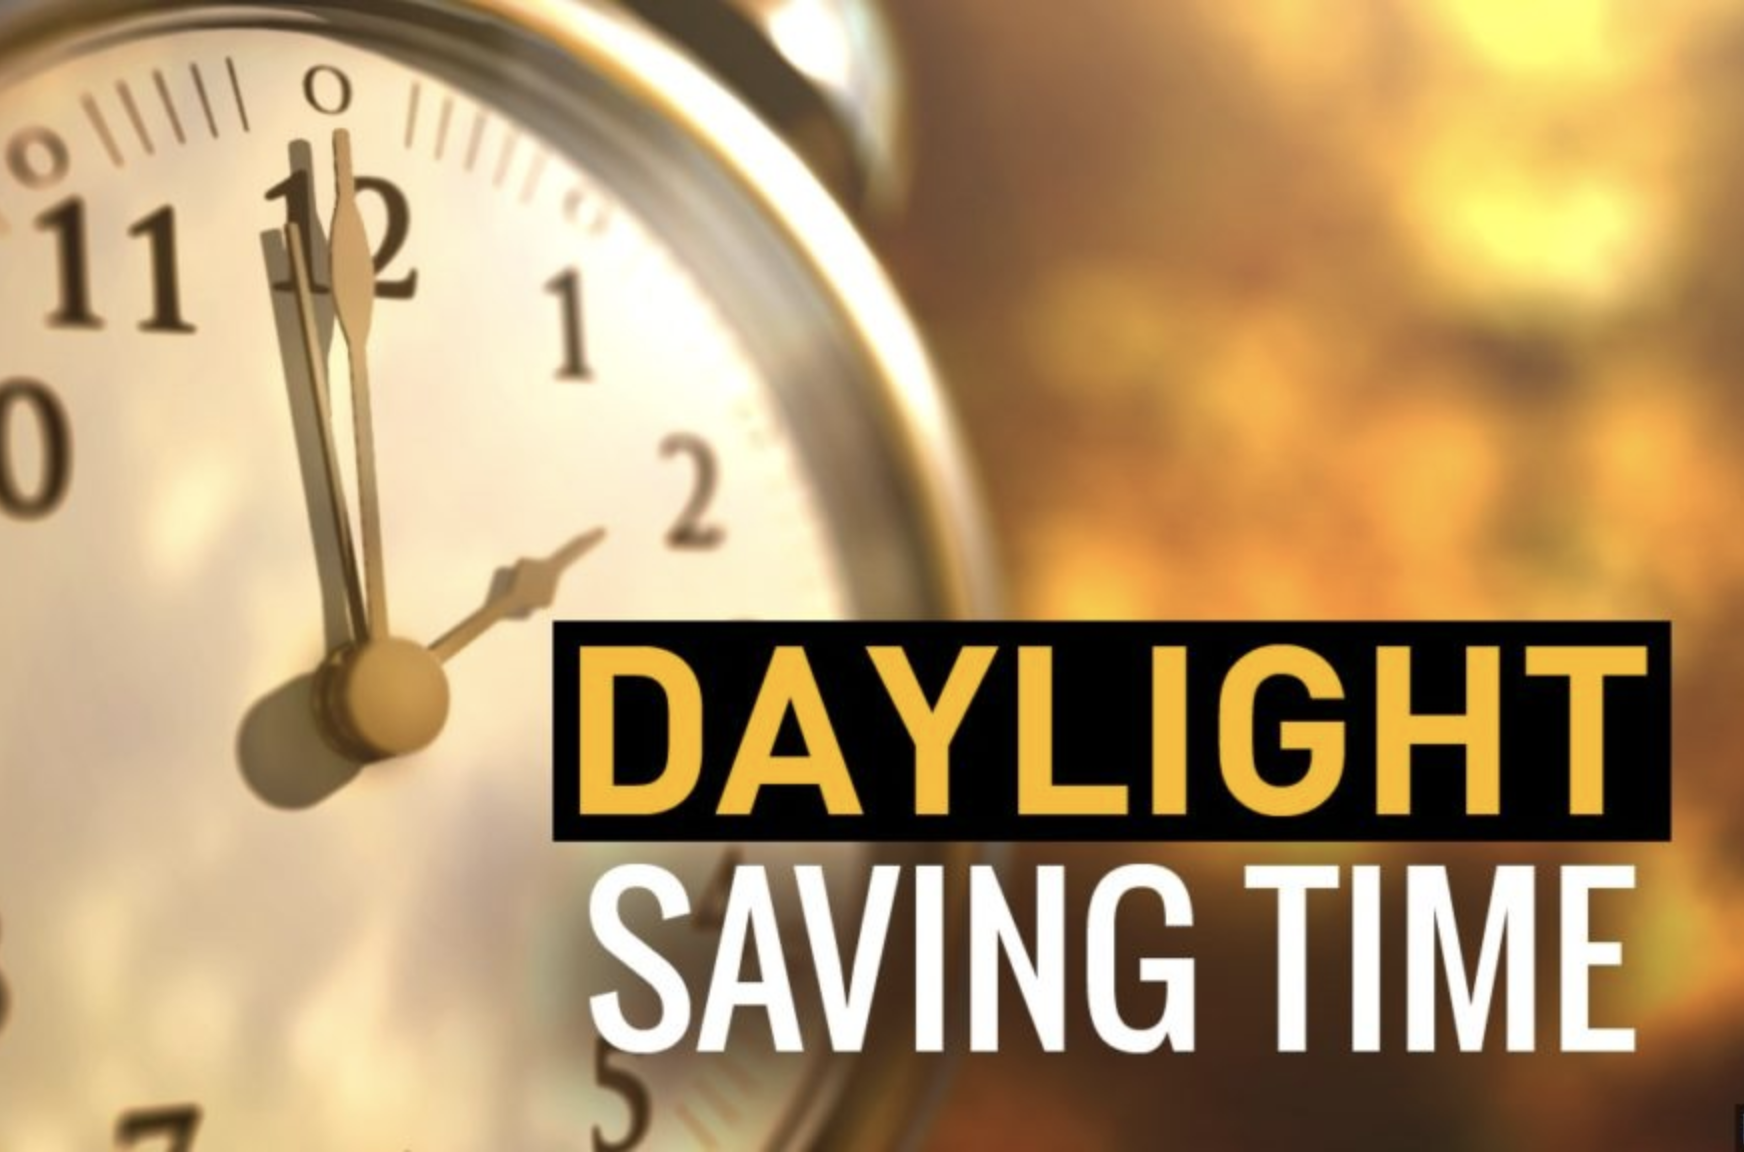 Remember to "fall back" for daylight savings time on November 1.